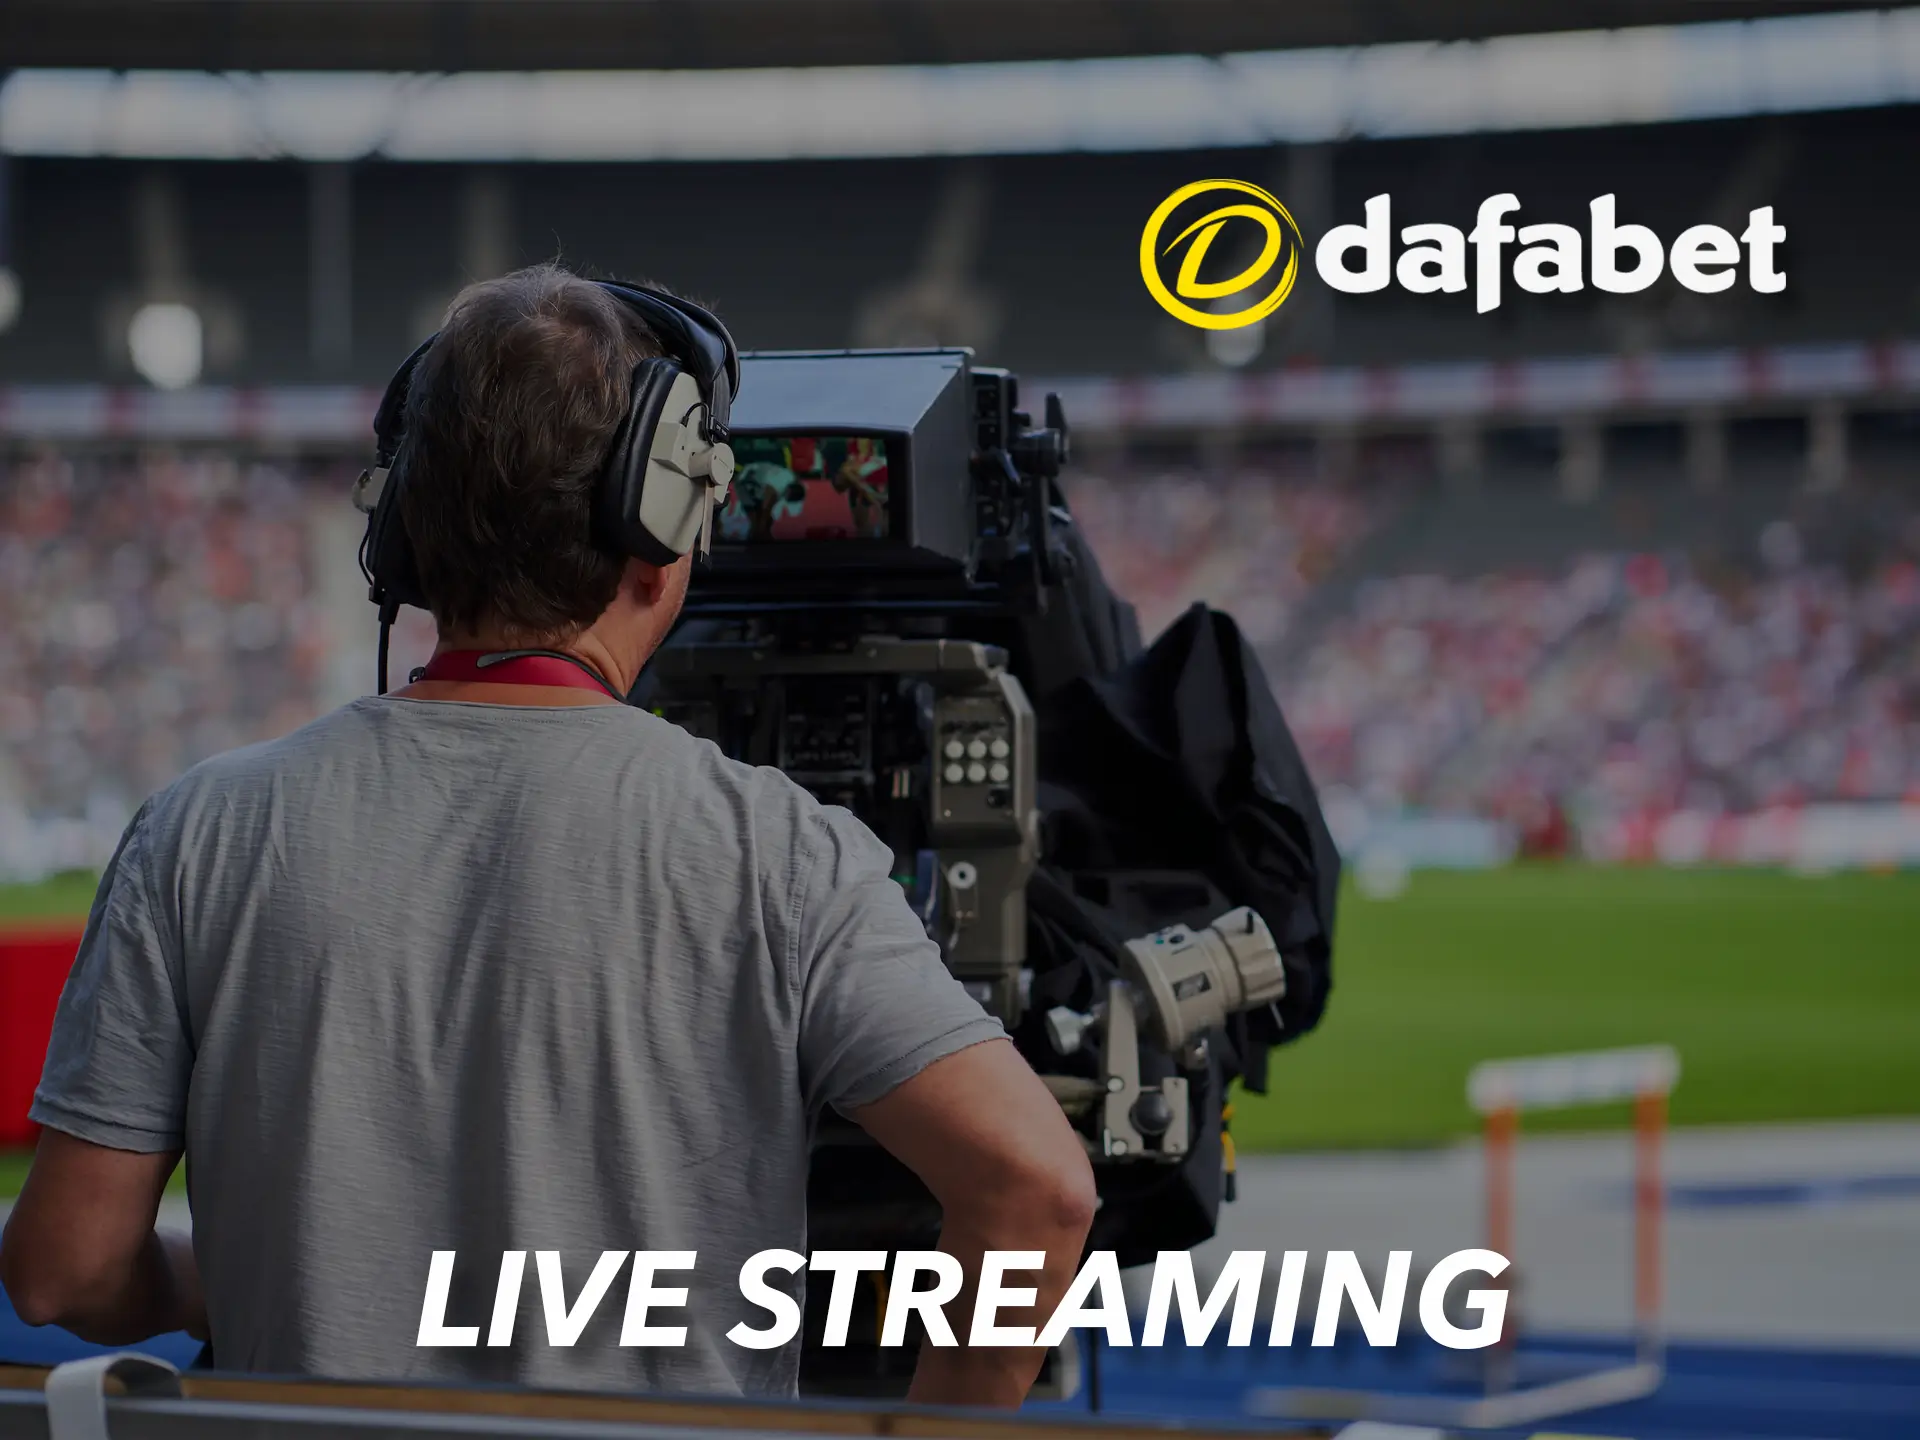 Watch sports broadcasts in good quality at Dafabet bookmaker.